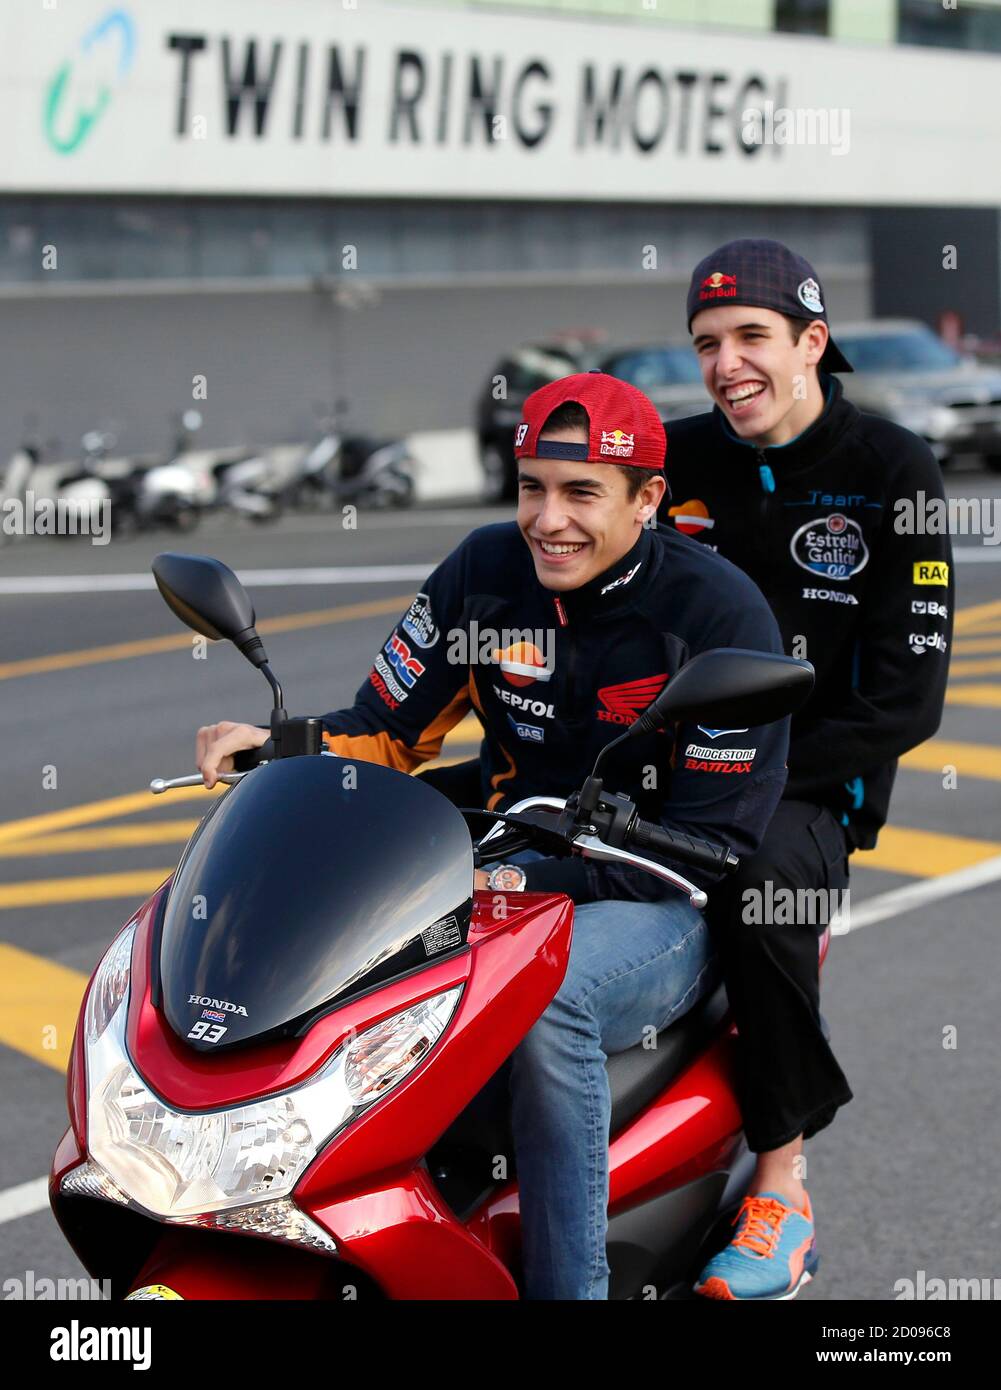 Honda MotoGP rider Marc Marquez of Spain and his younger brother Honda  Moto3 rider Alex Marquez (R) of Spain ride a scooter on the track during  their course inspection at the Twin